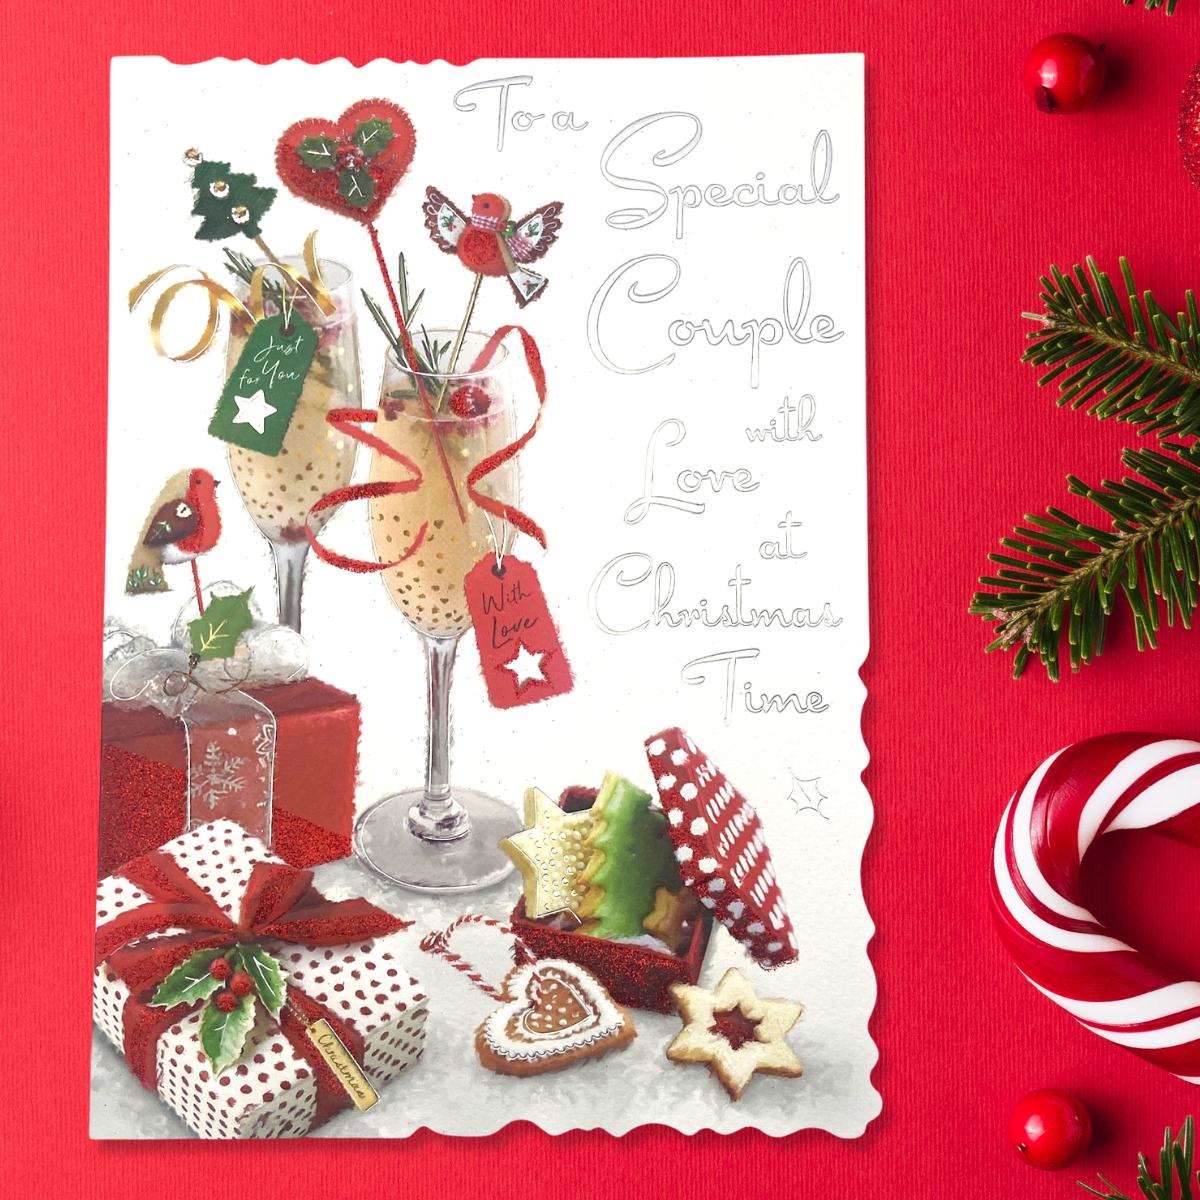 Special Couple - Velvet - Large Christmas Card Front Image